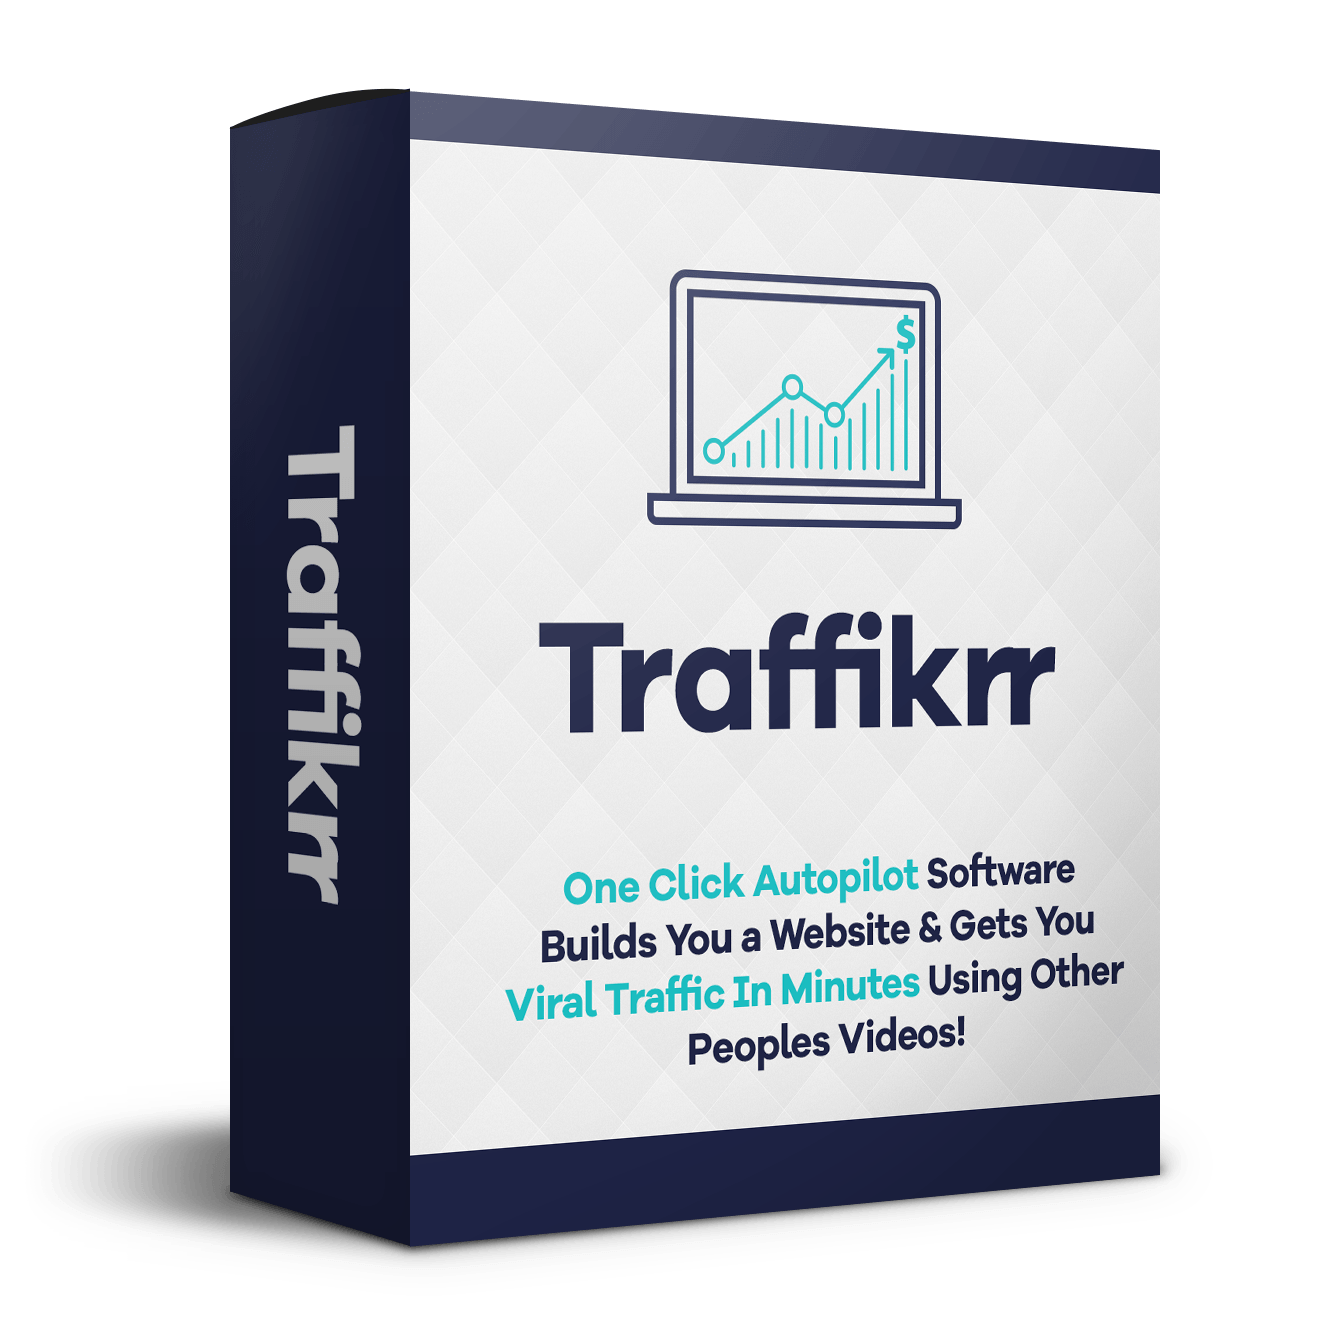 [JOIN OR LEAVE IT?] Traffikrr PRO By Glynn Kosky And Ariel Sanders Review : Grab The Freshest Videos From YouTube With One Click Before Anybody Else And Get Unlimited Social Traffic From Facebook, Twitter, LinkedIn, Tumblr